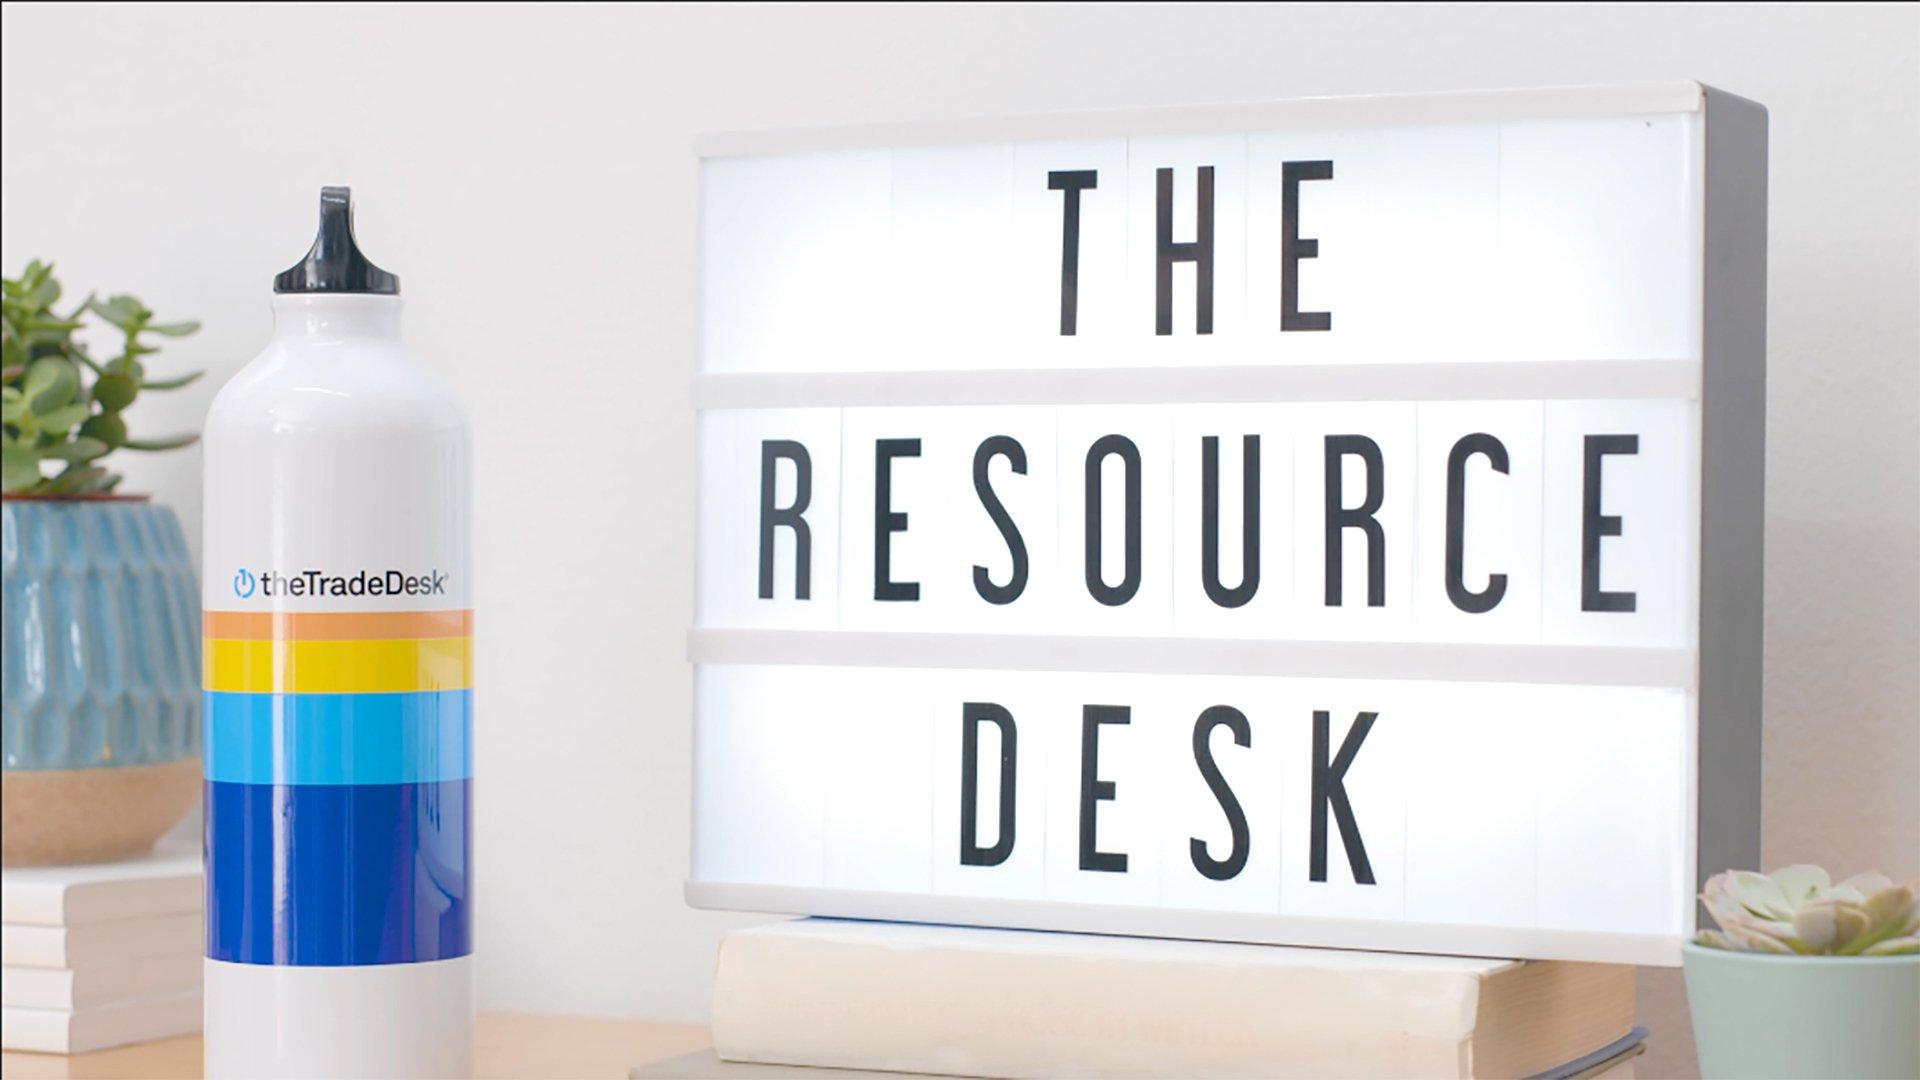 Image of a board displaying "The Resource Desk" with a water bottle with The Trade Desk logo, to the left